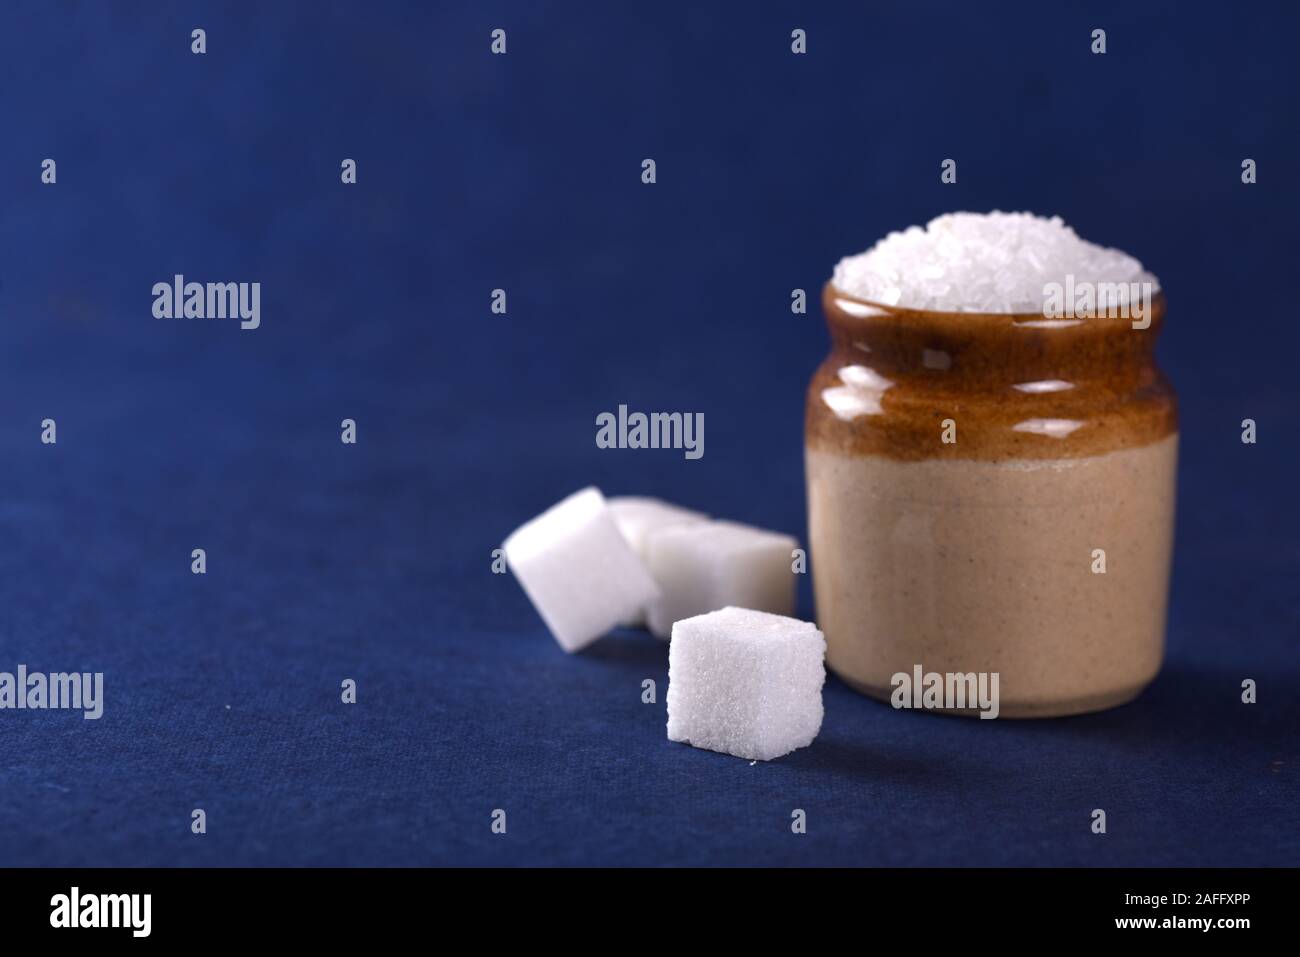 2 Pile Sugar Beeds Images, Stock Photos, 3D objects, & Vectors